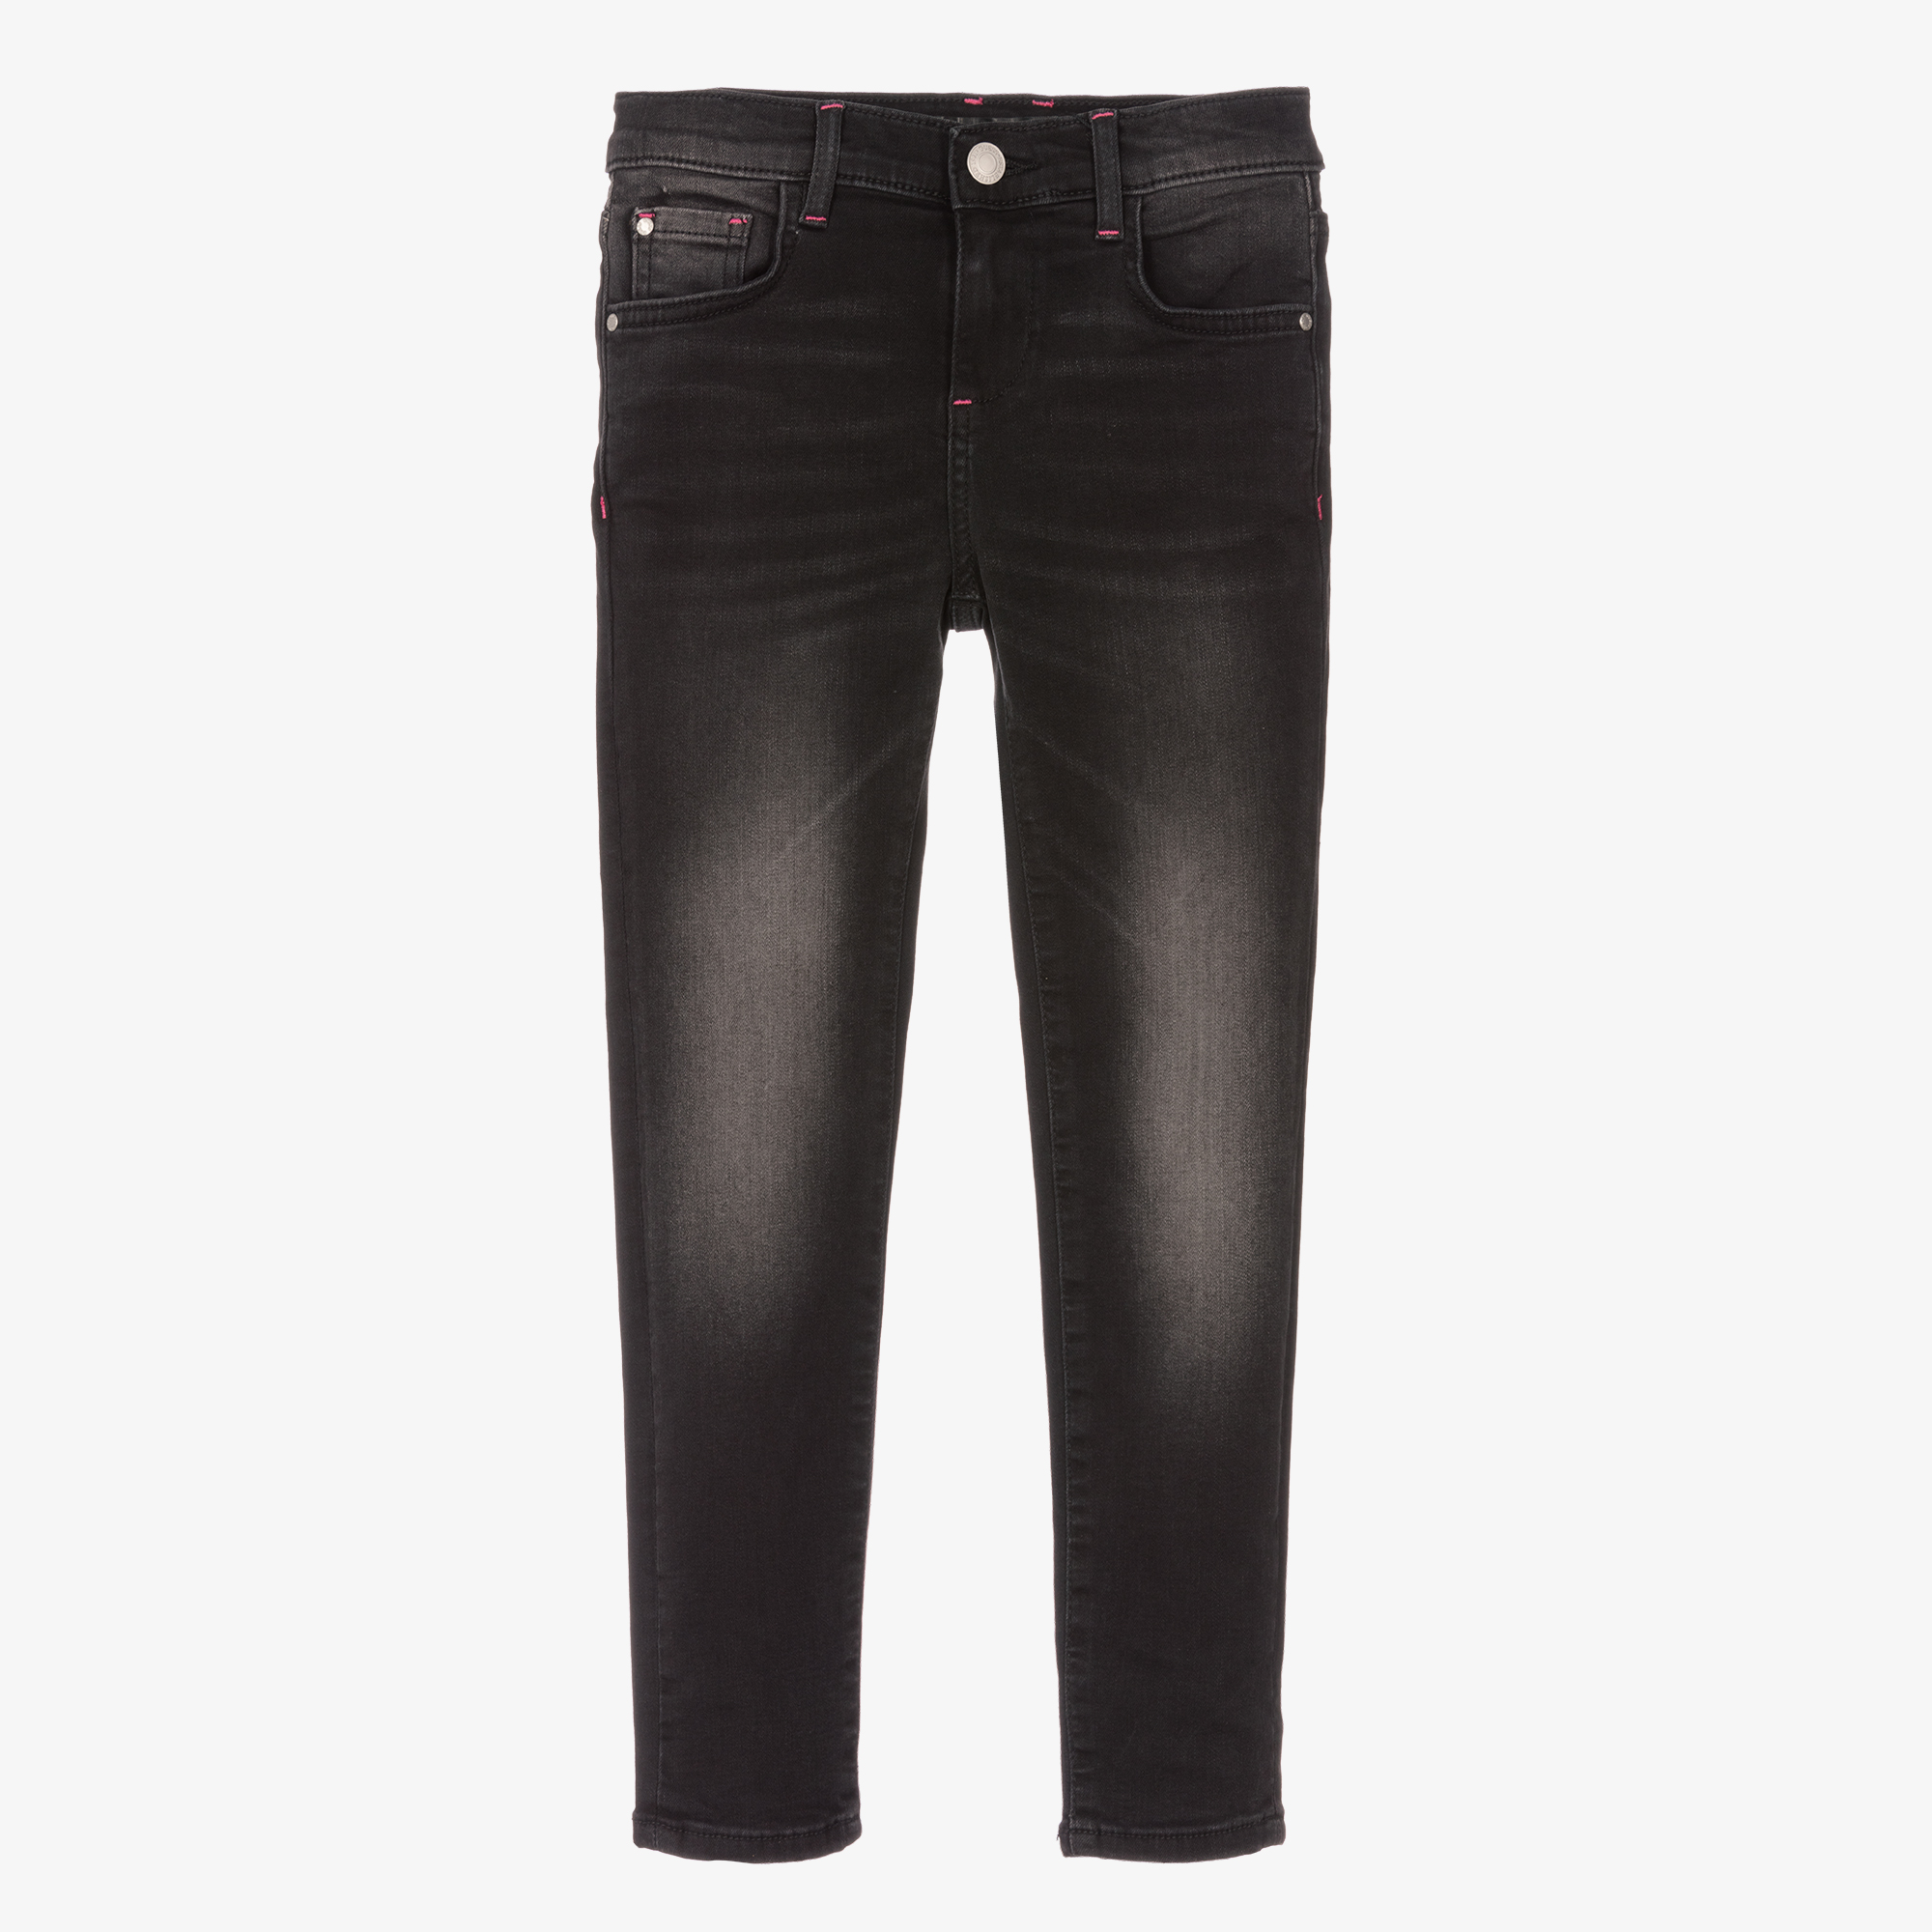 GUESS Miami Skinny Fit Jeans, Carry Black at John Lewis & Partners